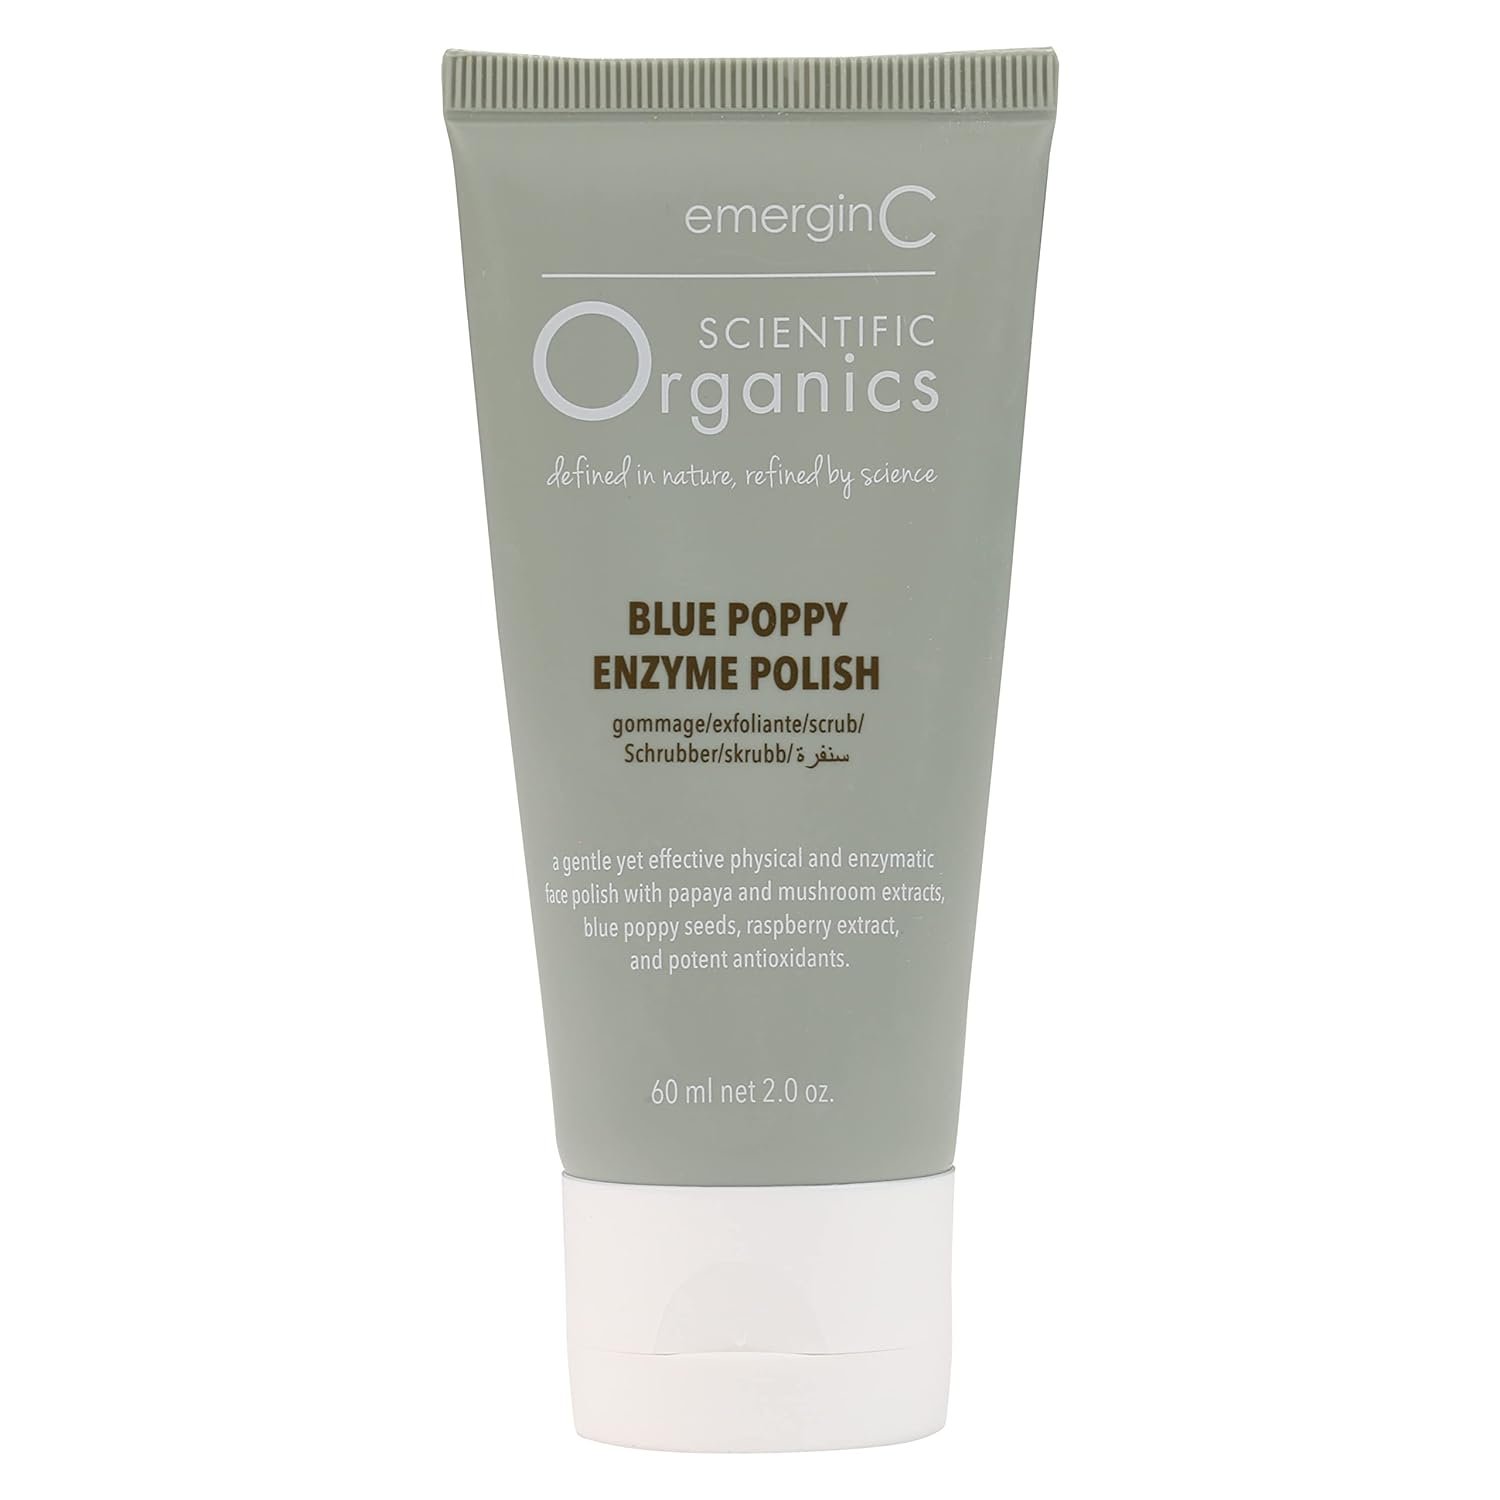 emerginC Scientific Organics Blue Poppy Enzyme Brightening Polish - Exfoliating Enzyme Face Scrub - Gently Removes Dead Skin Cells, Visibly Smoothes Texture + Tone 2 oz, 60 ml - image 1 of 7